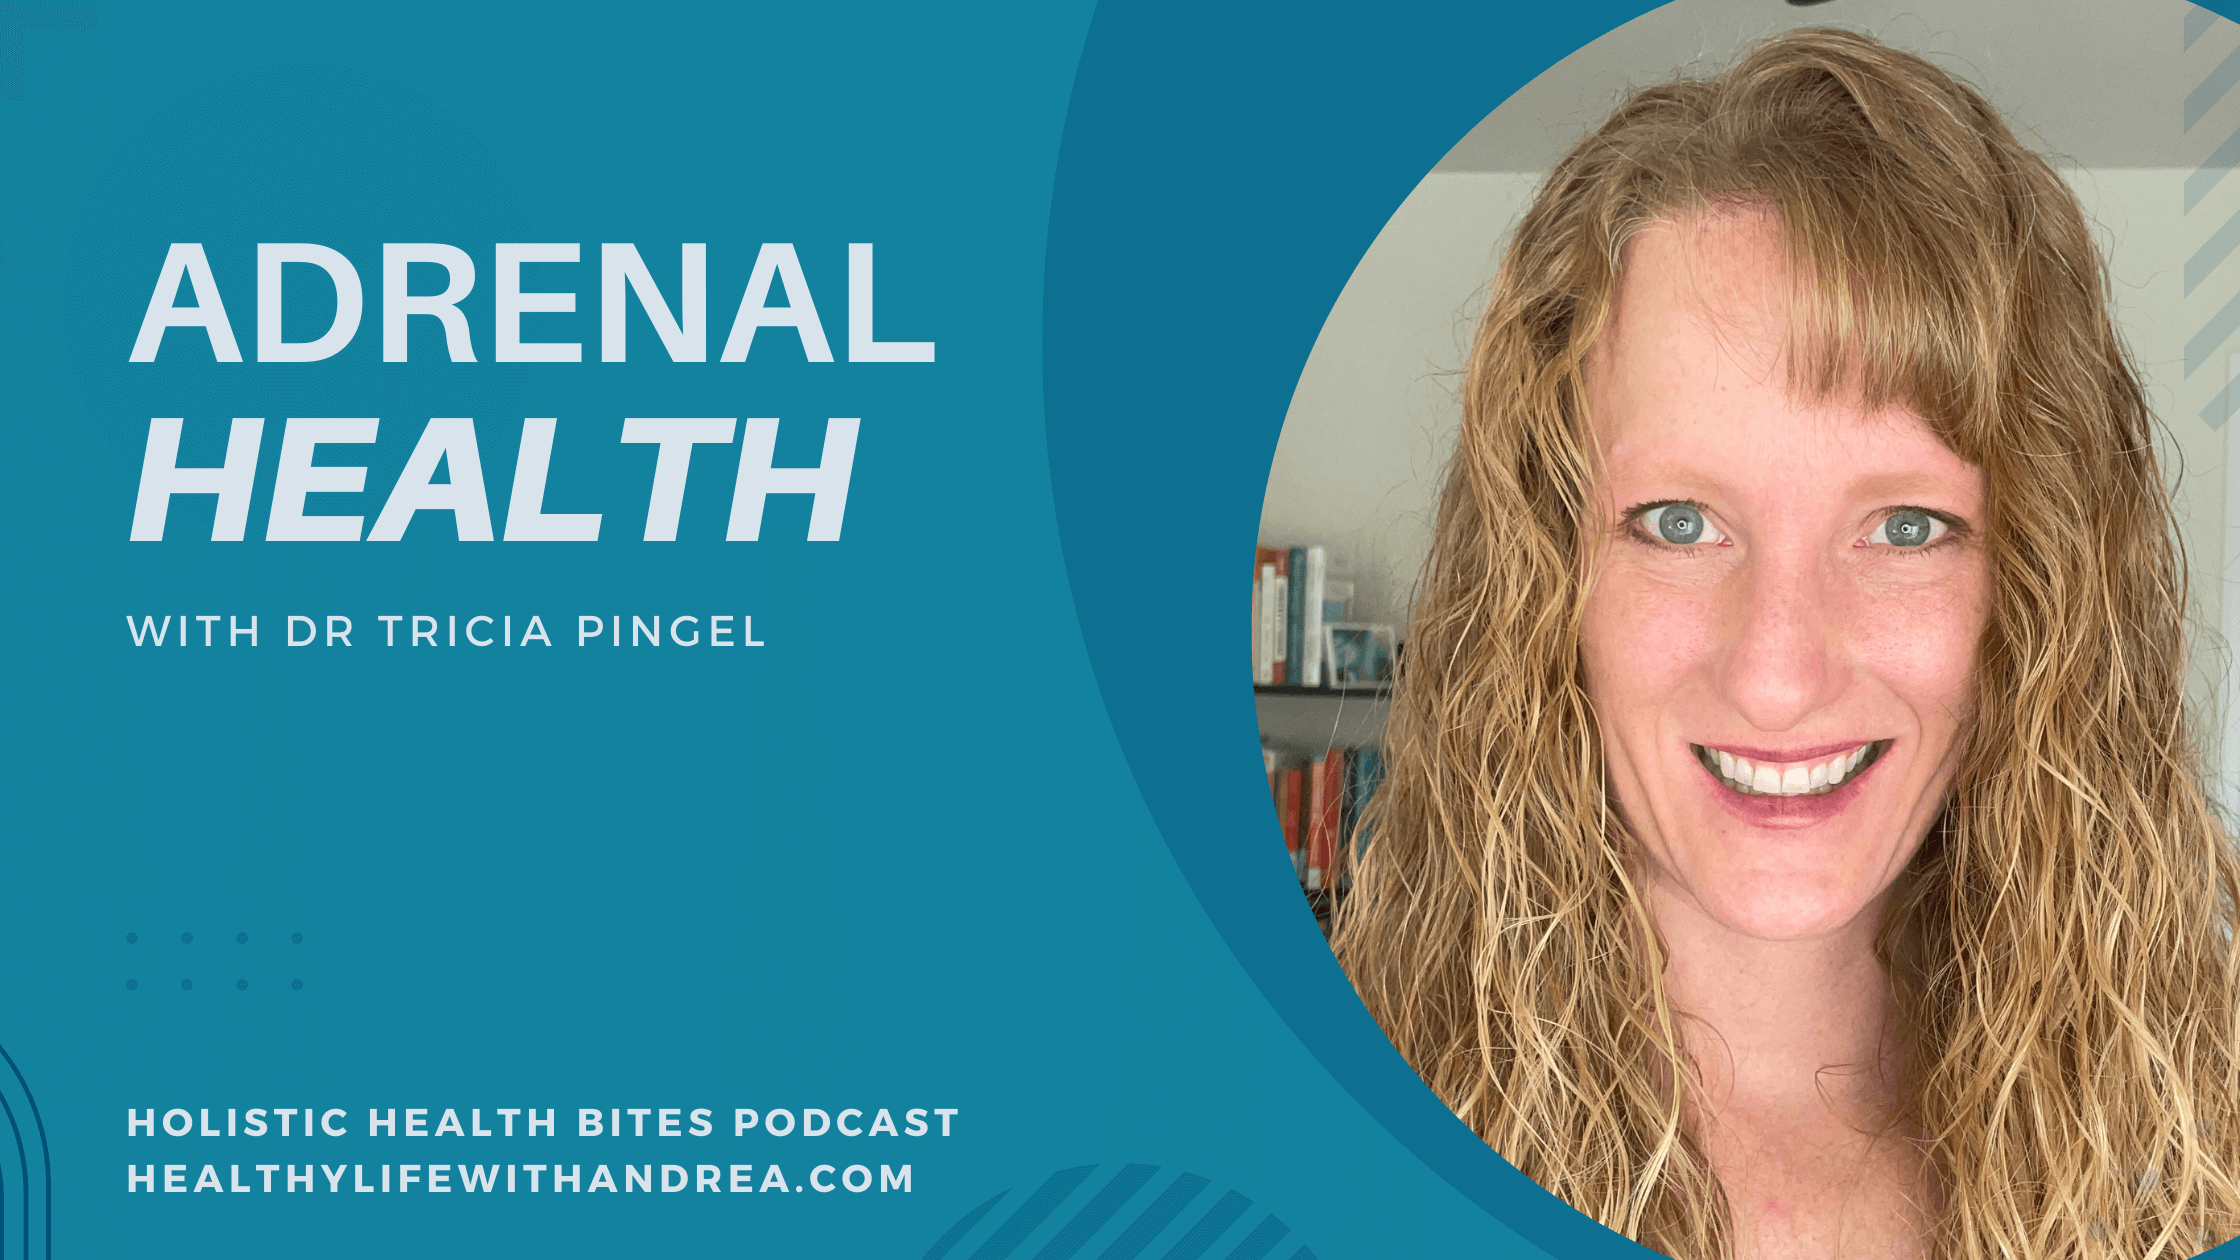 Functional Nutritionist Andrea Nicholson, host of the Holistic Health Bites podcast, talks to Dr Tricia Pingel about adrenal health